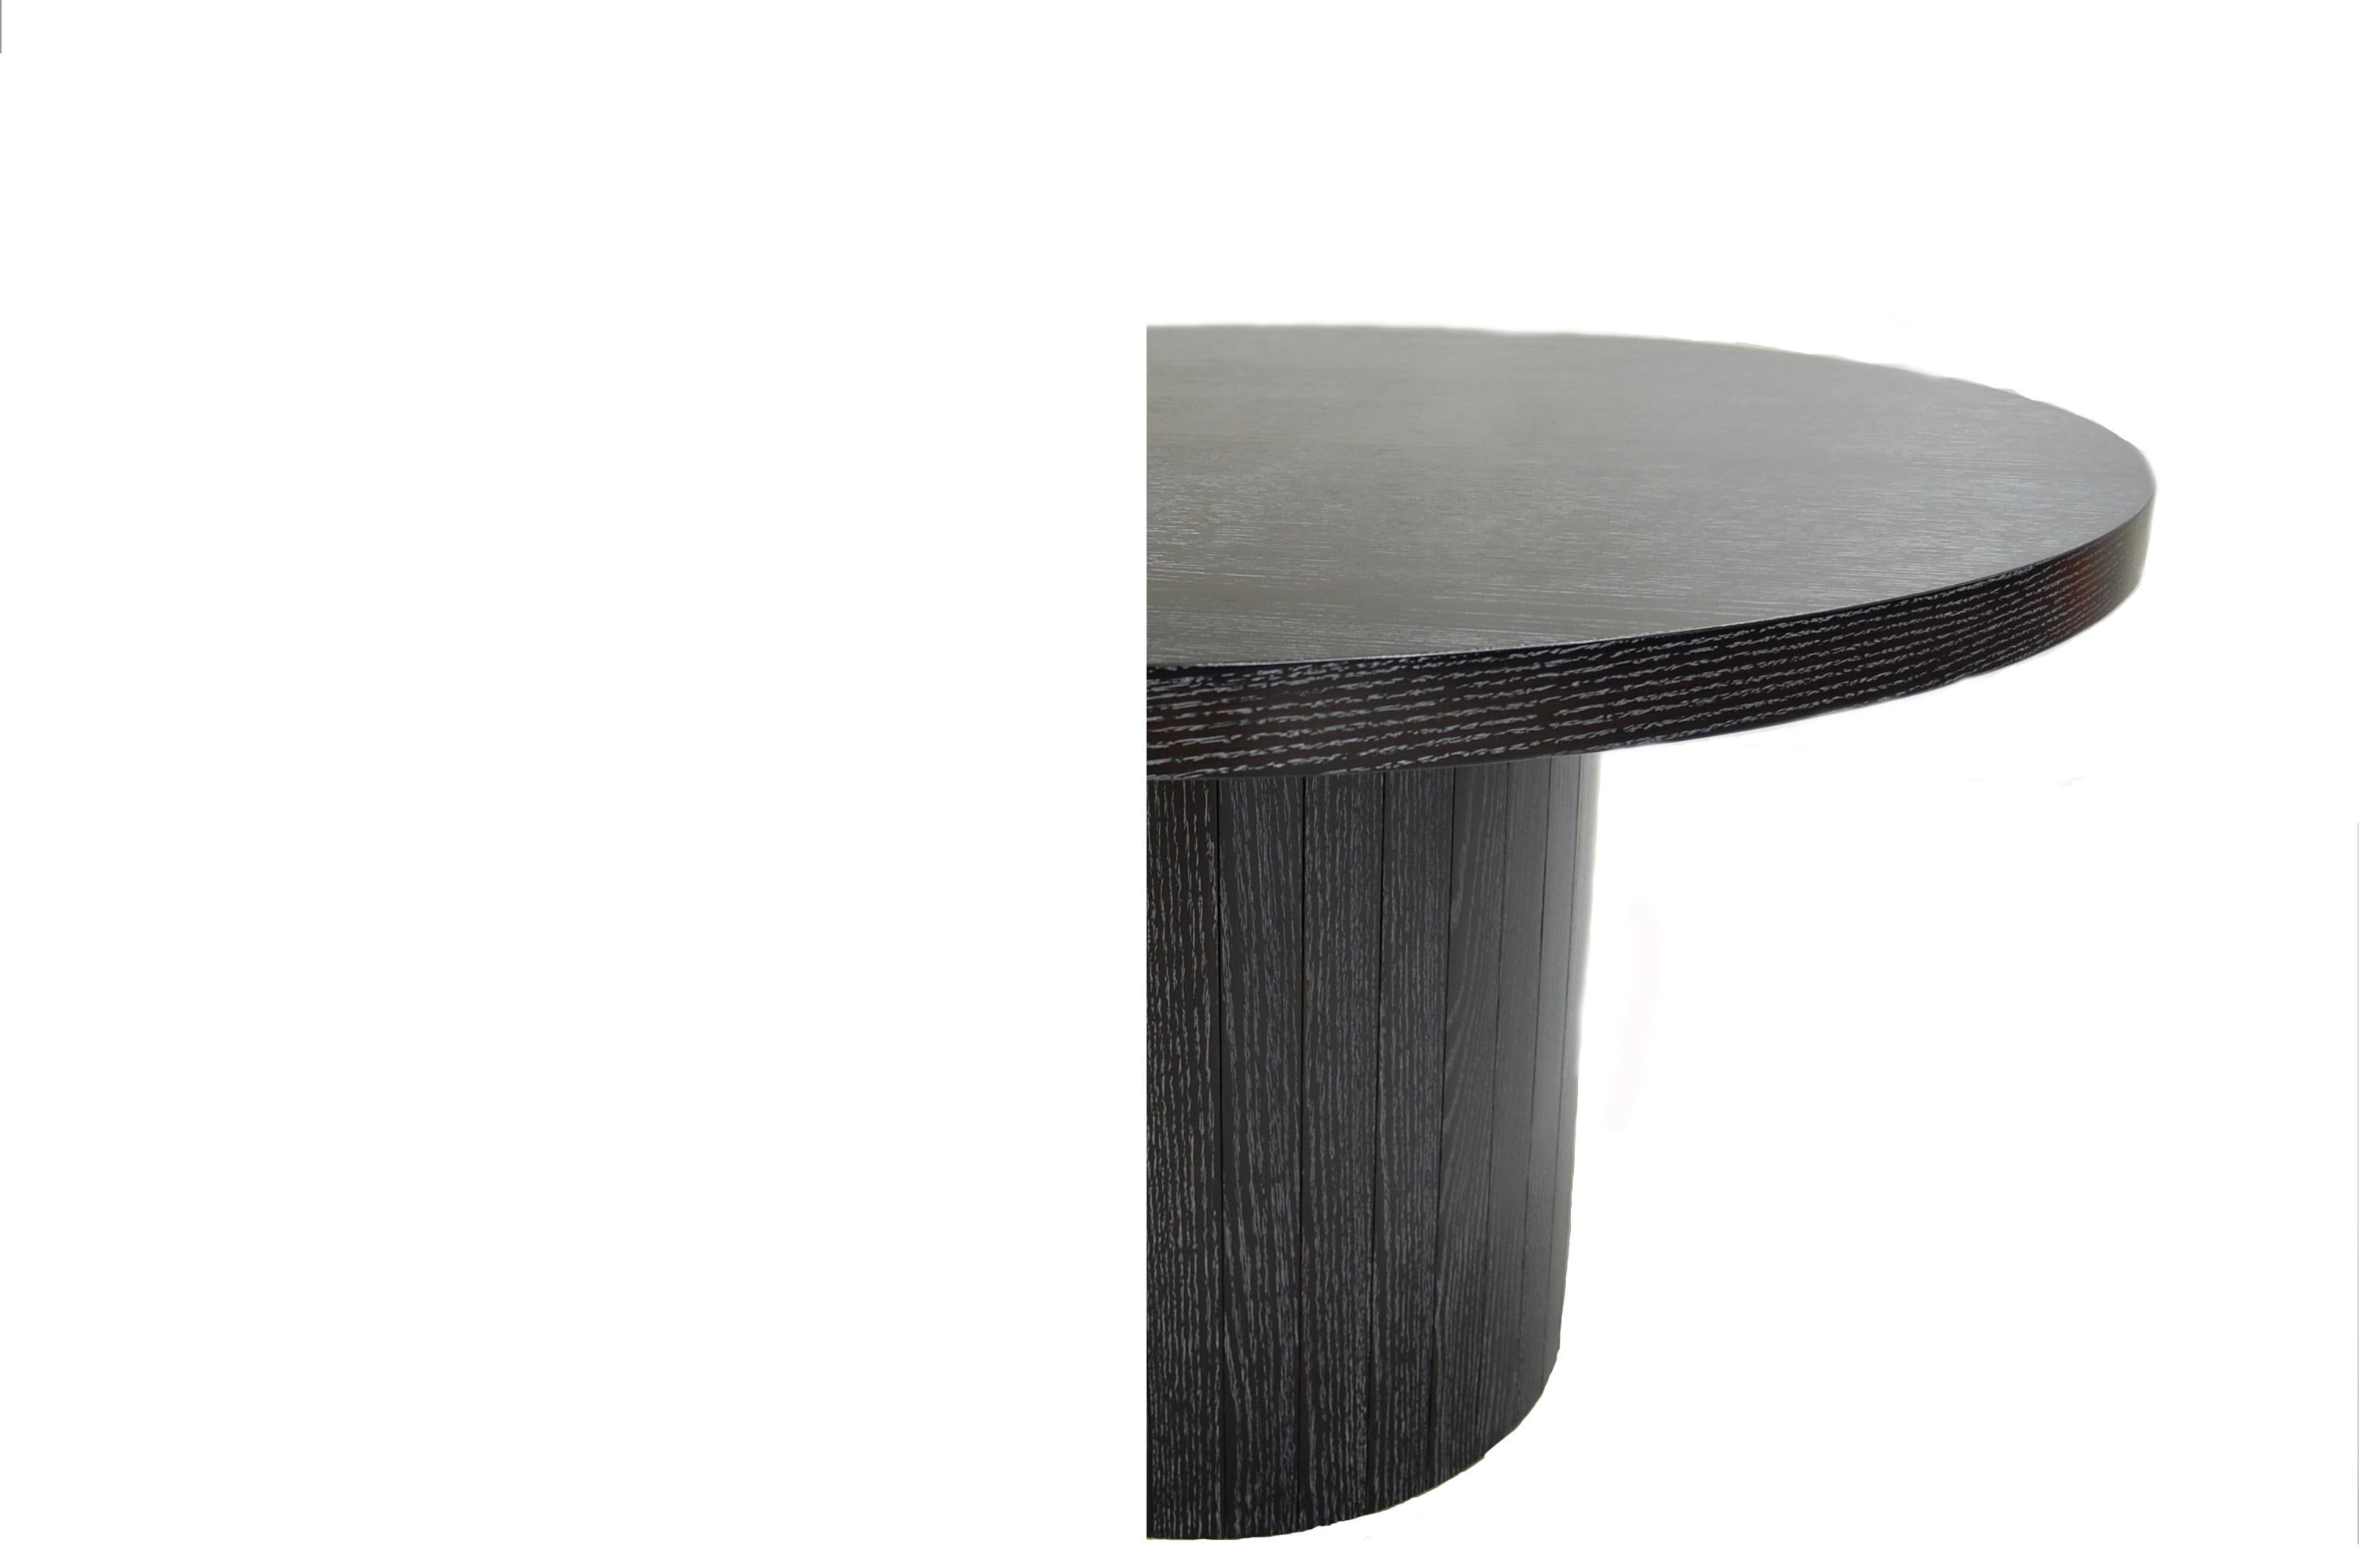 American Plank Wood Table Round Top and Base For Sale